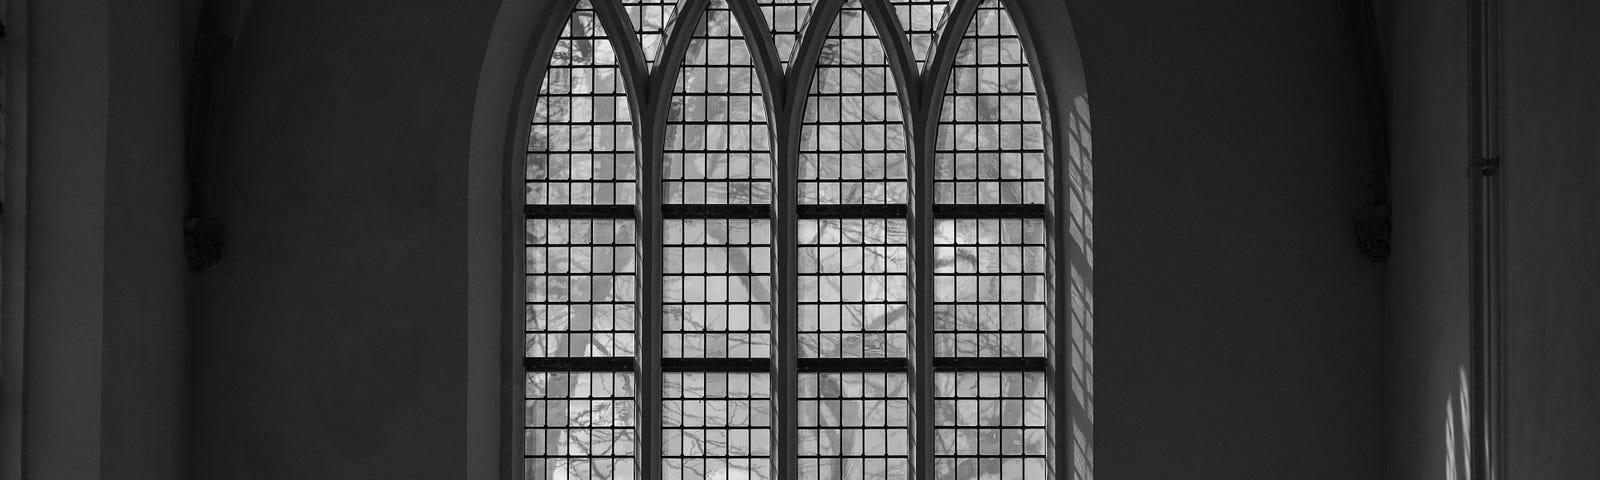 Black and white picture of an ornate cathedral window.